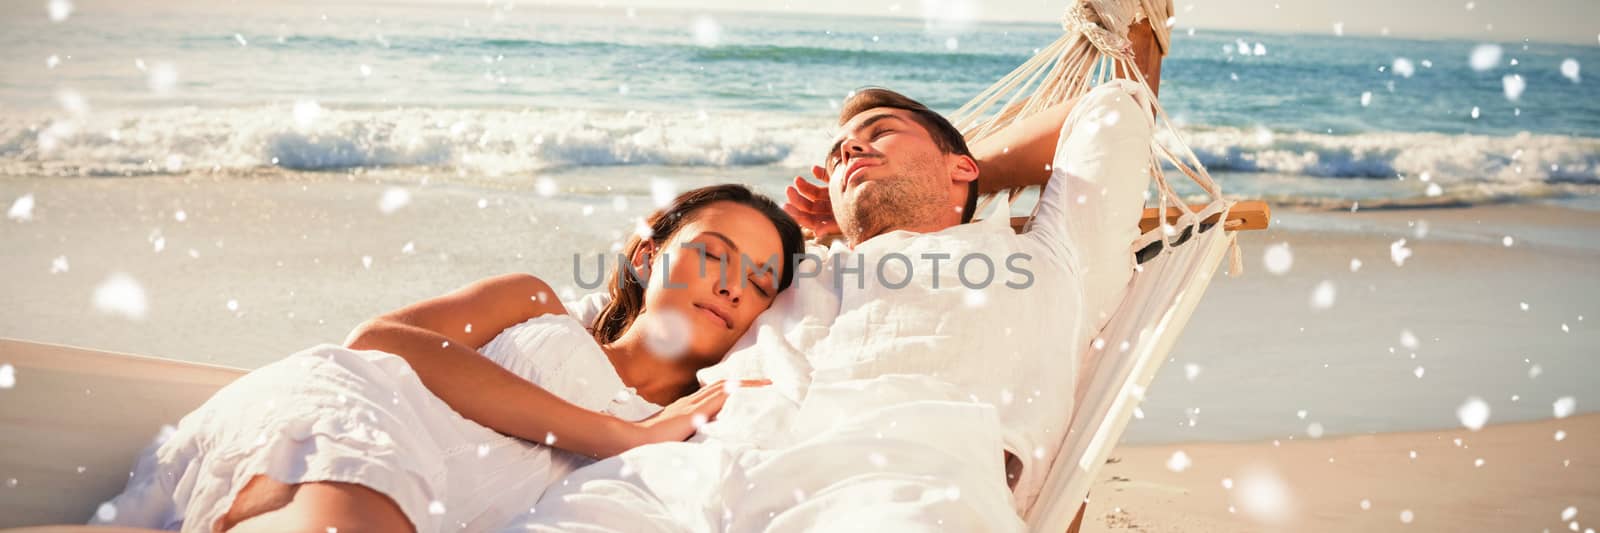 Calm couple napping in a hammock against snow falling